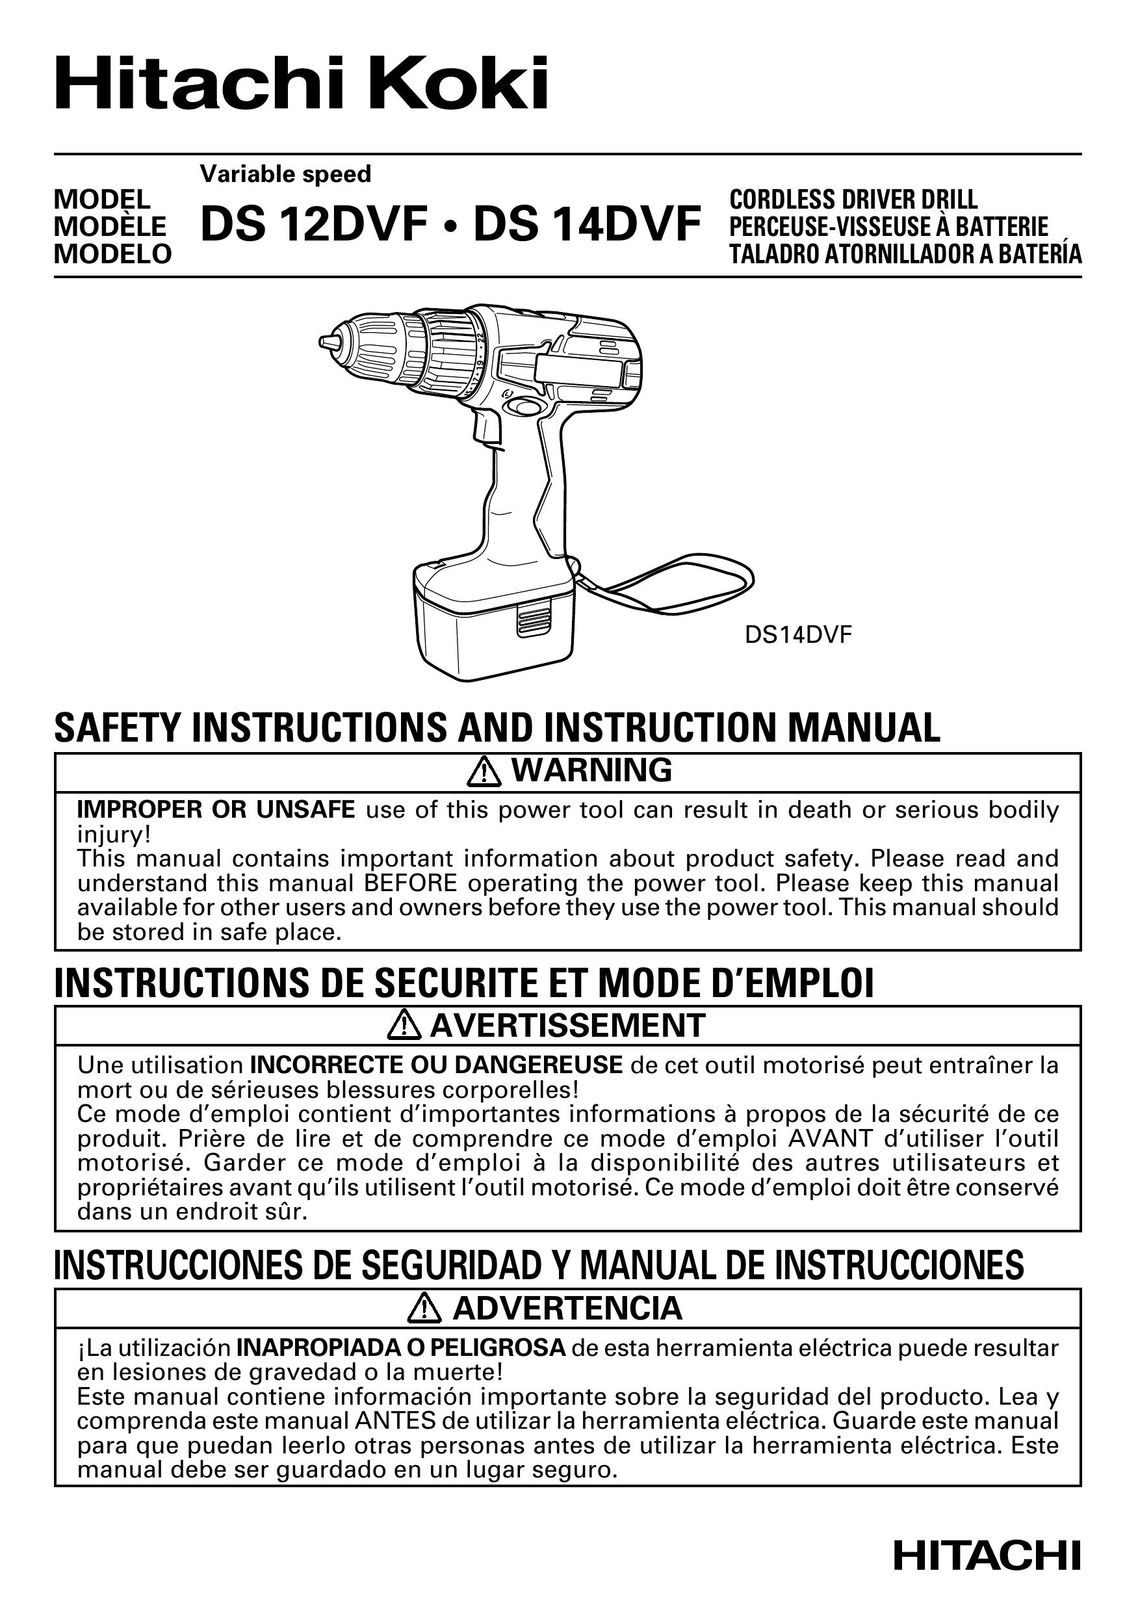 InFocus DS 14DVF Cordless Drill User Manual